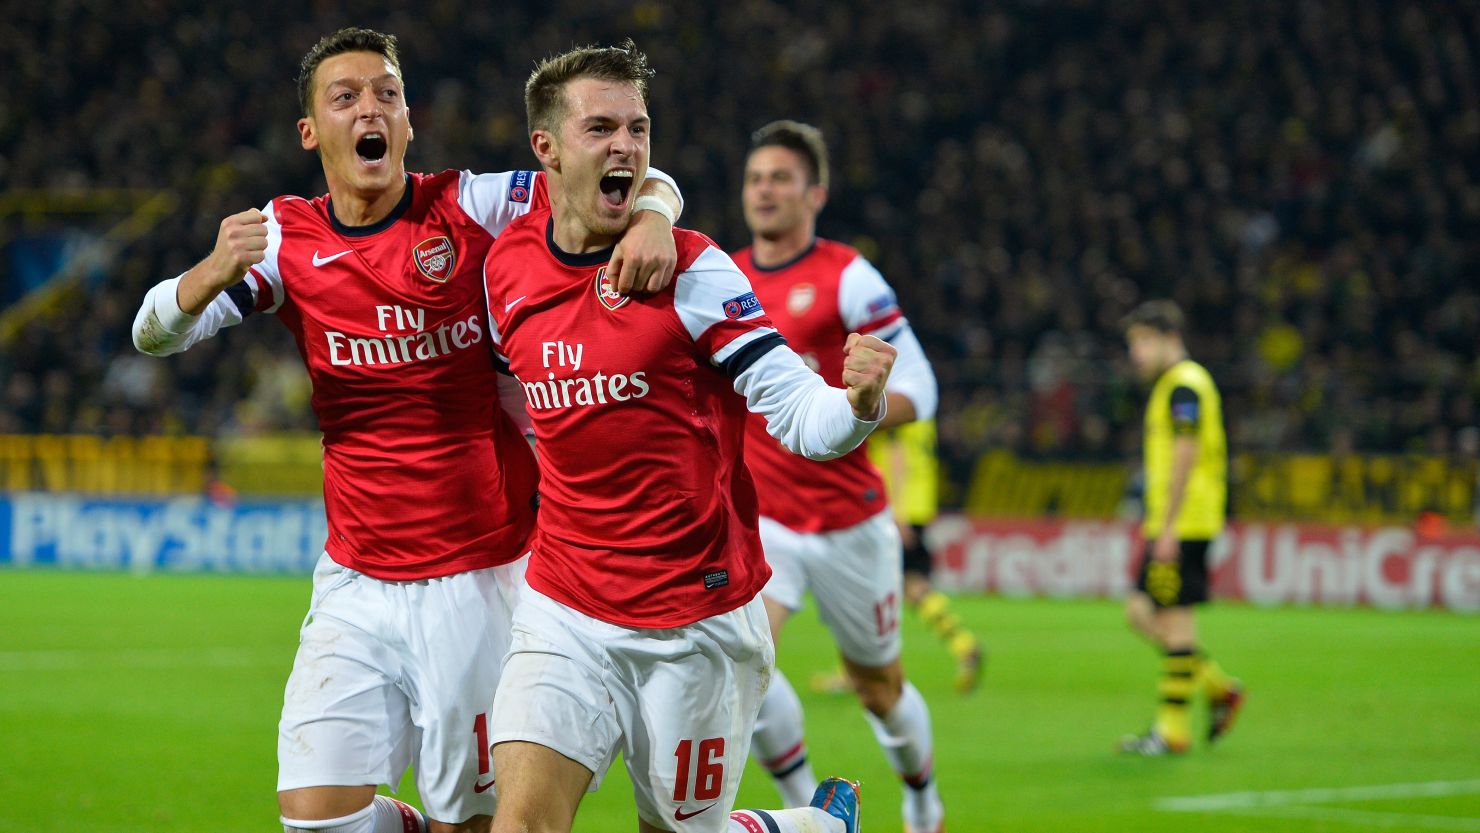 Aaron Ramsey was on target for Arsenal in their Champions League clash at Borussia Dortmund.